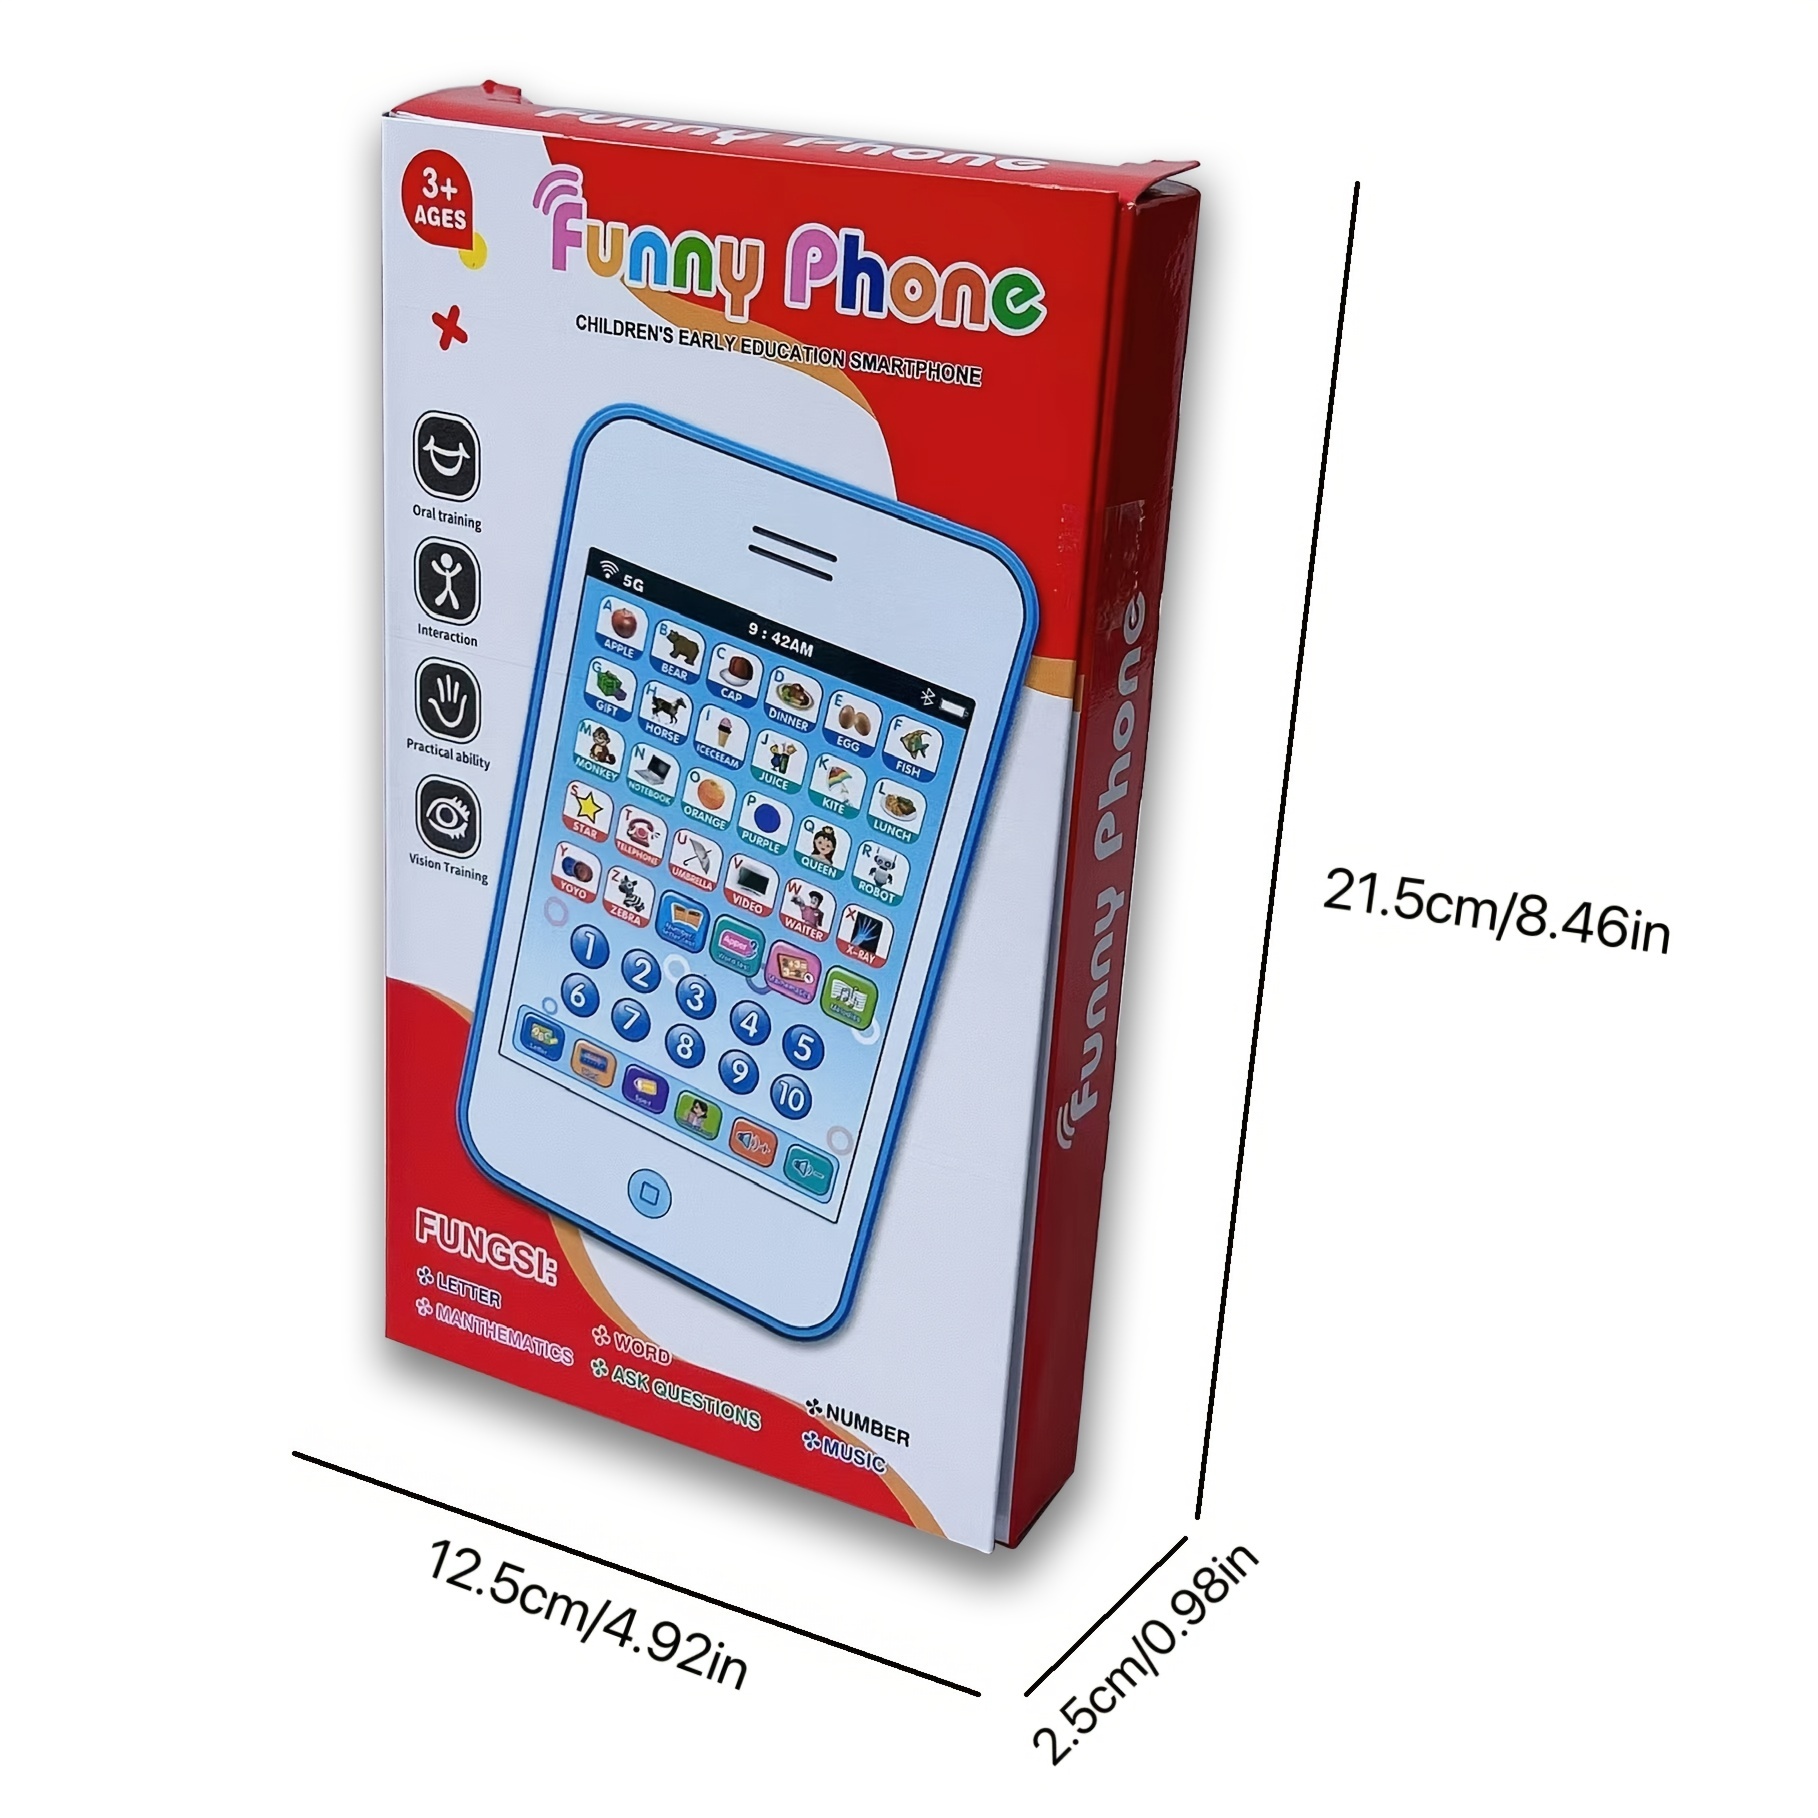 Children's Simulation Learning Touch Screen Toy Phone With Led Light